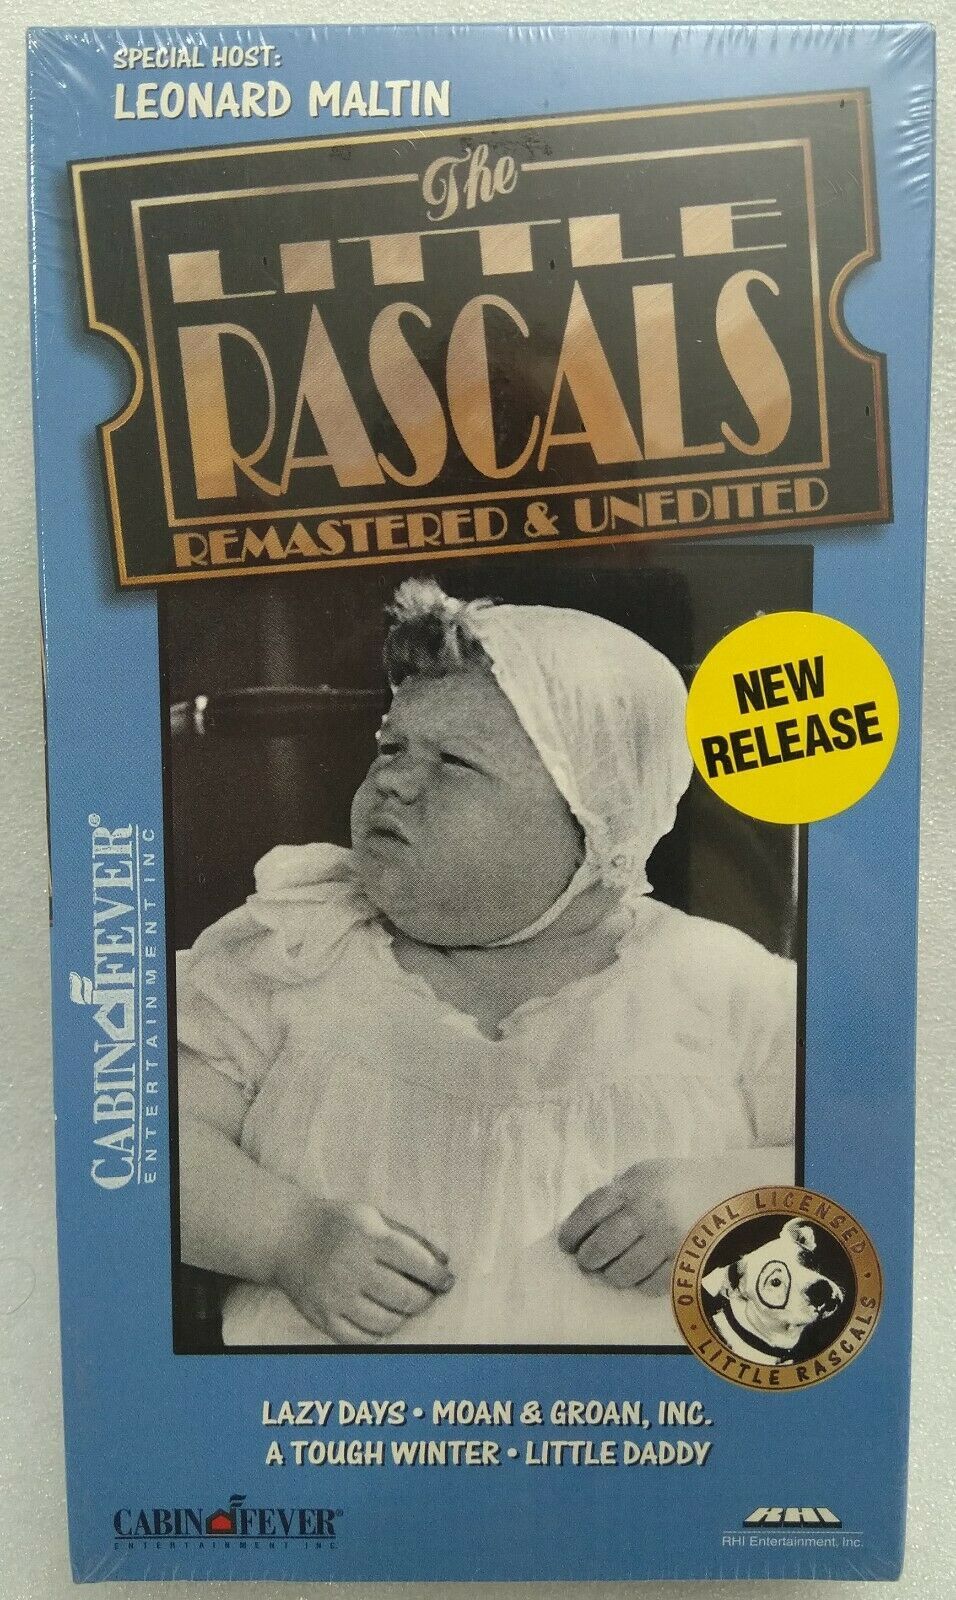 VHS The Little Rascals - The Rascals Remastered and Unedited Vol 20 ...